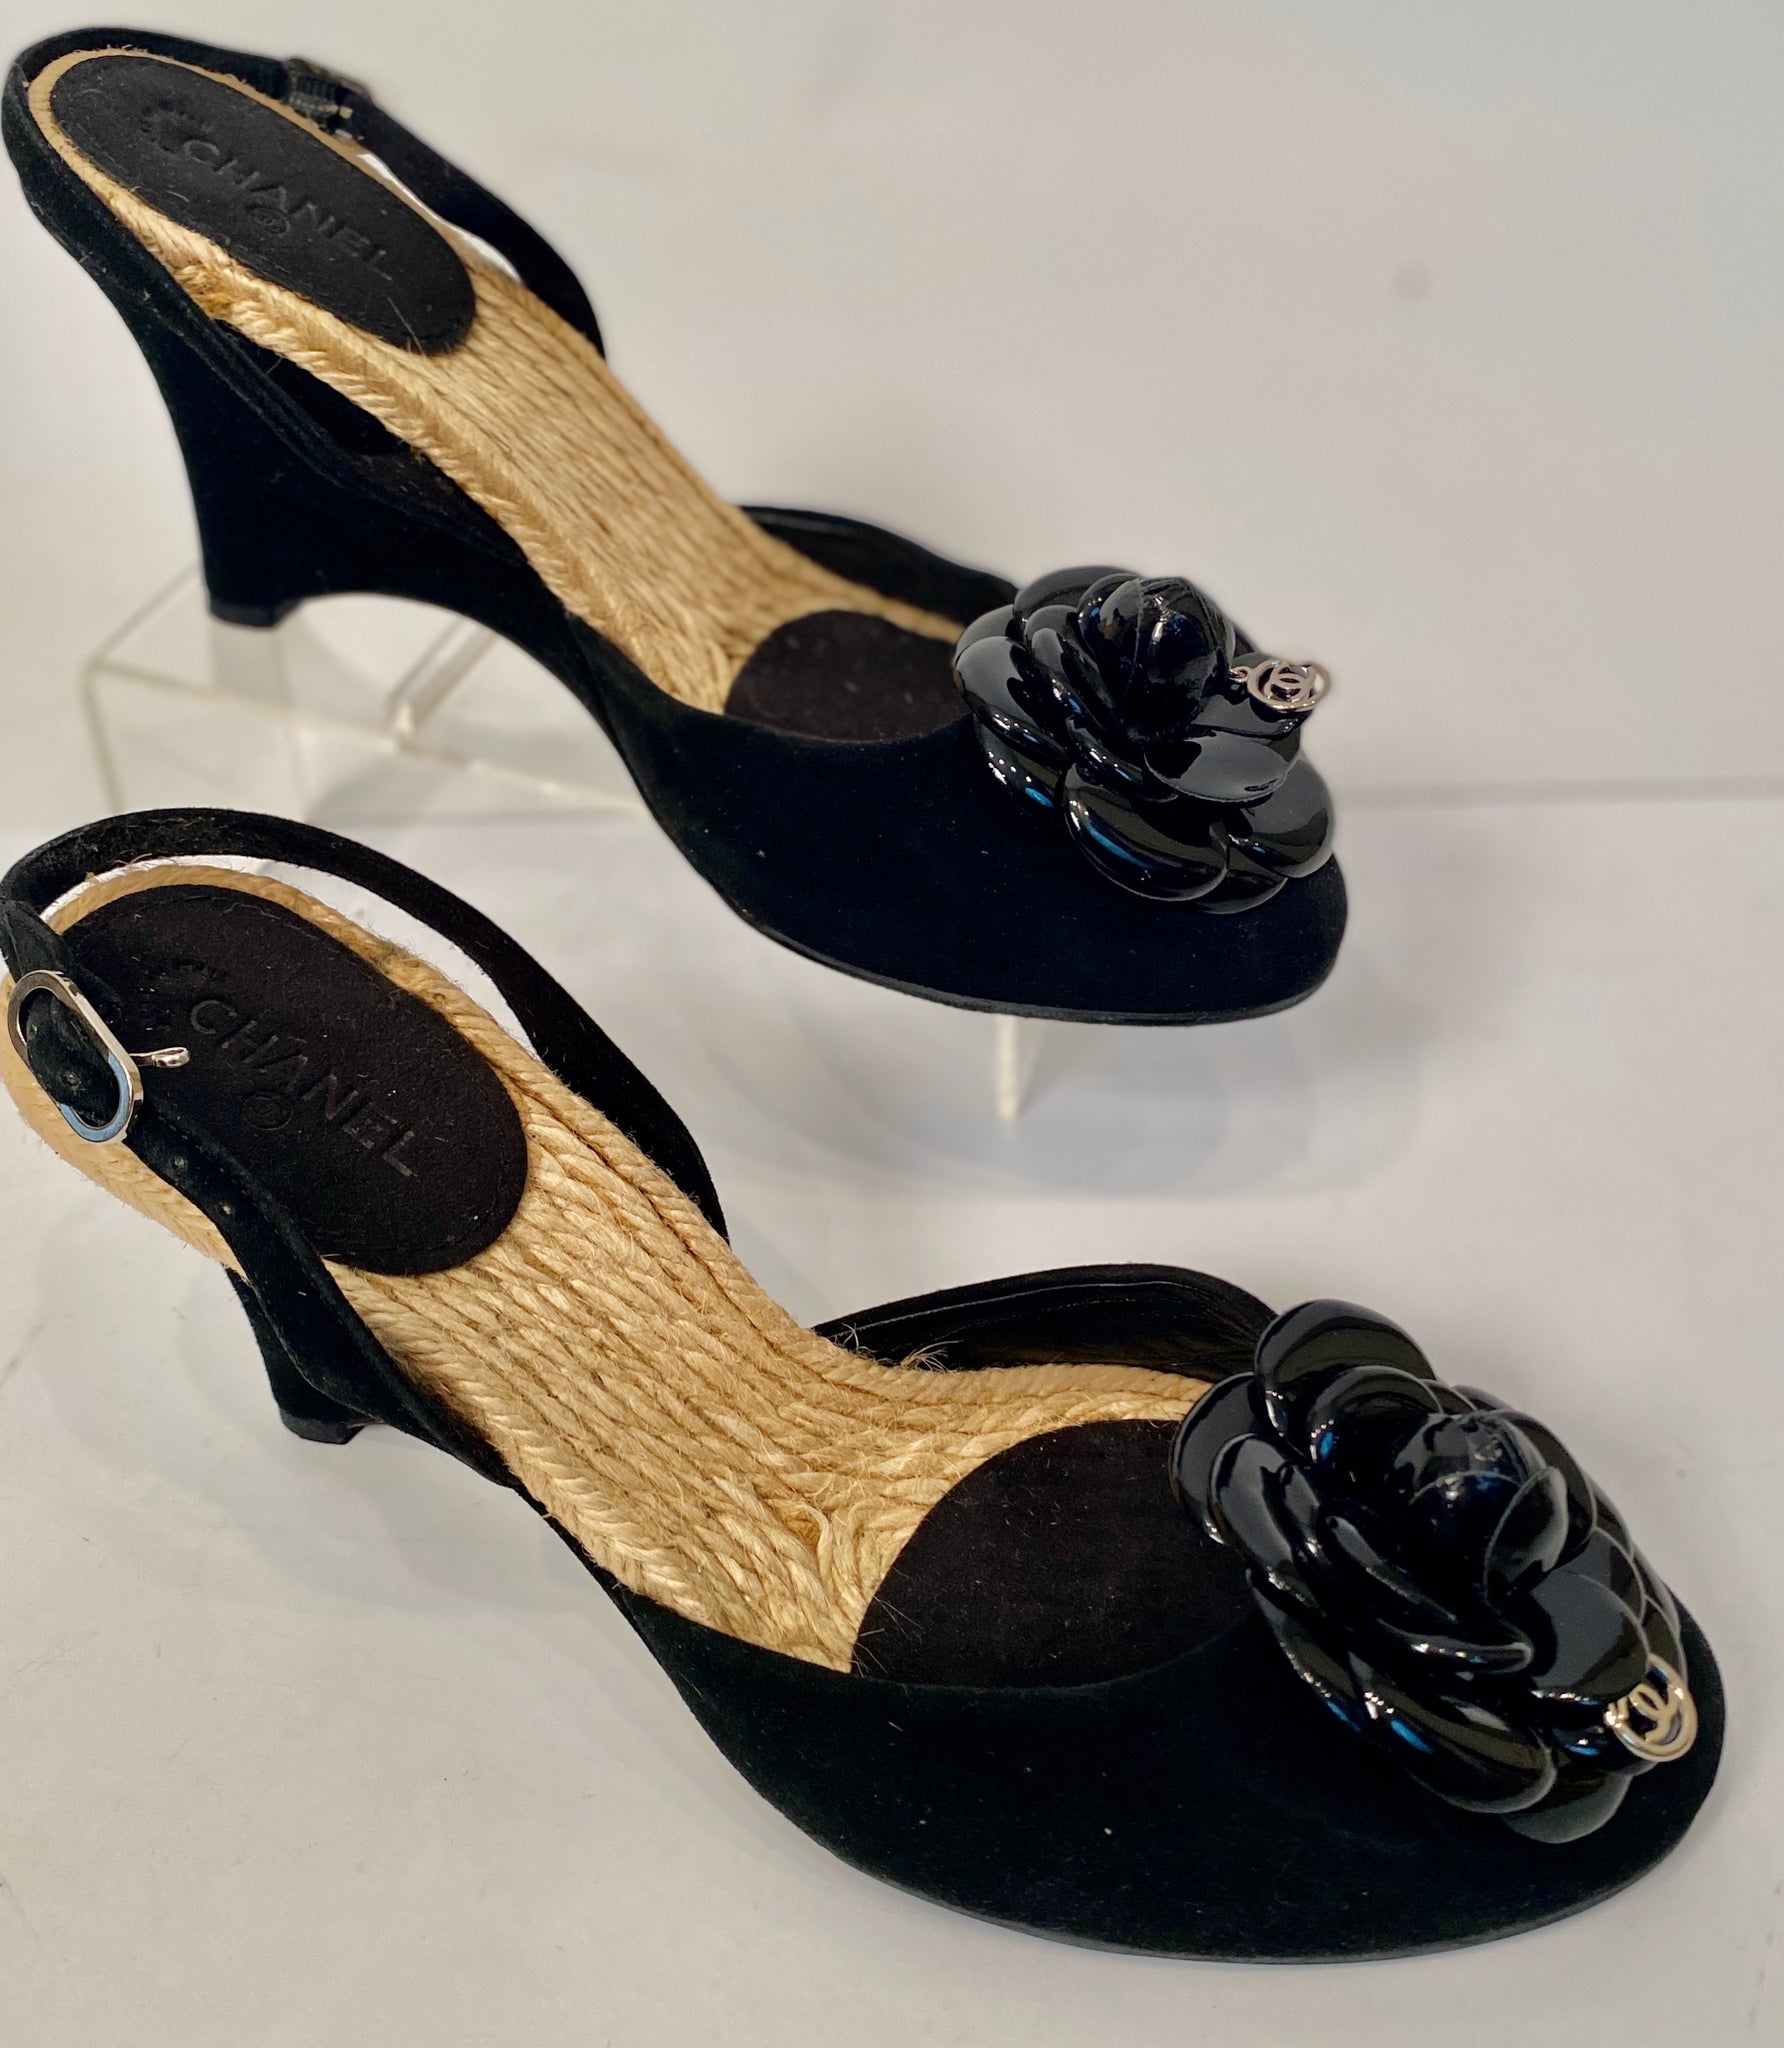 Chanel Black Patent Leather Camellia Embellished Open Toe Wedge Sandals  Size 38 Chanel